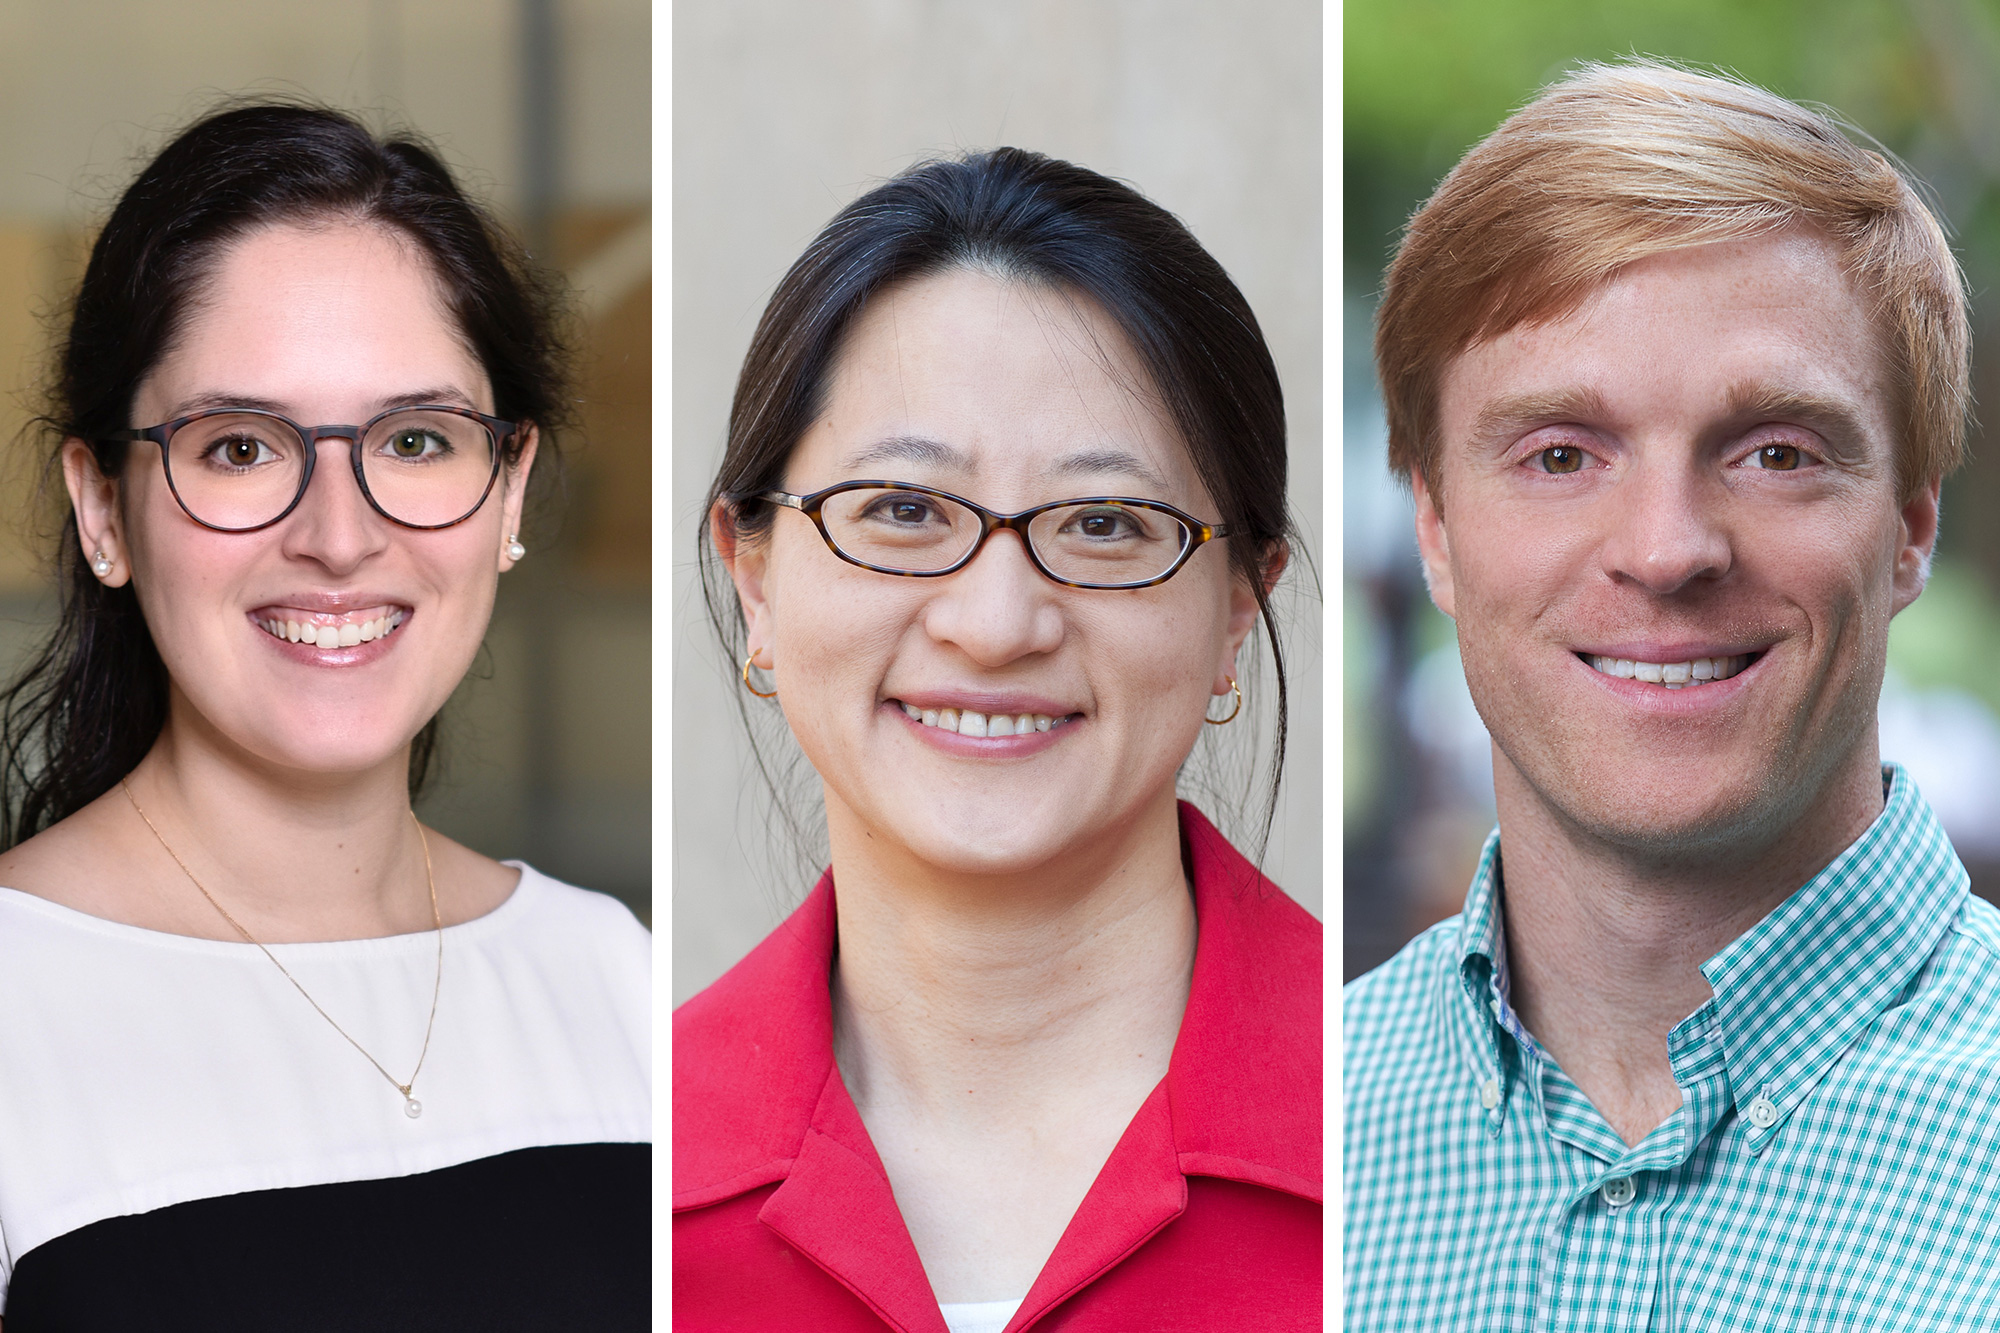 Left to right: Audrey Bazerghi SM ’20, MBA ’20; Deishin Lee ’90, SM ’92; and Jimmy Smith SM ’18, MBA ’18 all pursued PhD programs after completing MIT's Leaders for Global Operations program.